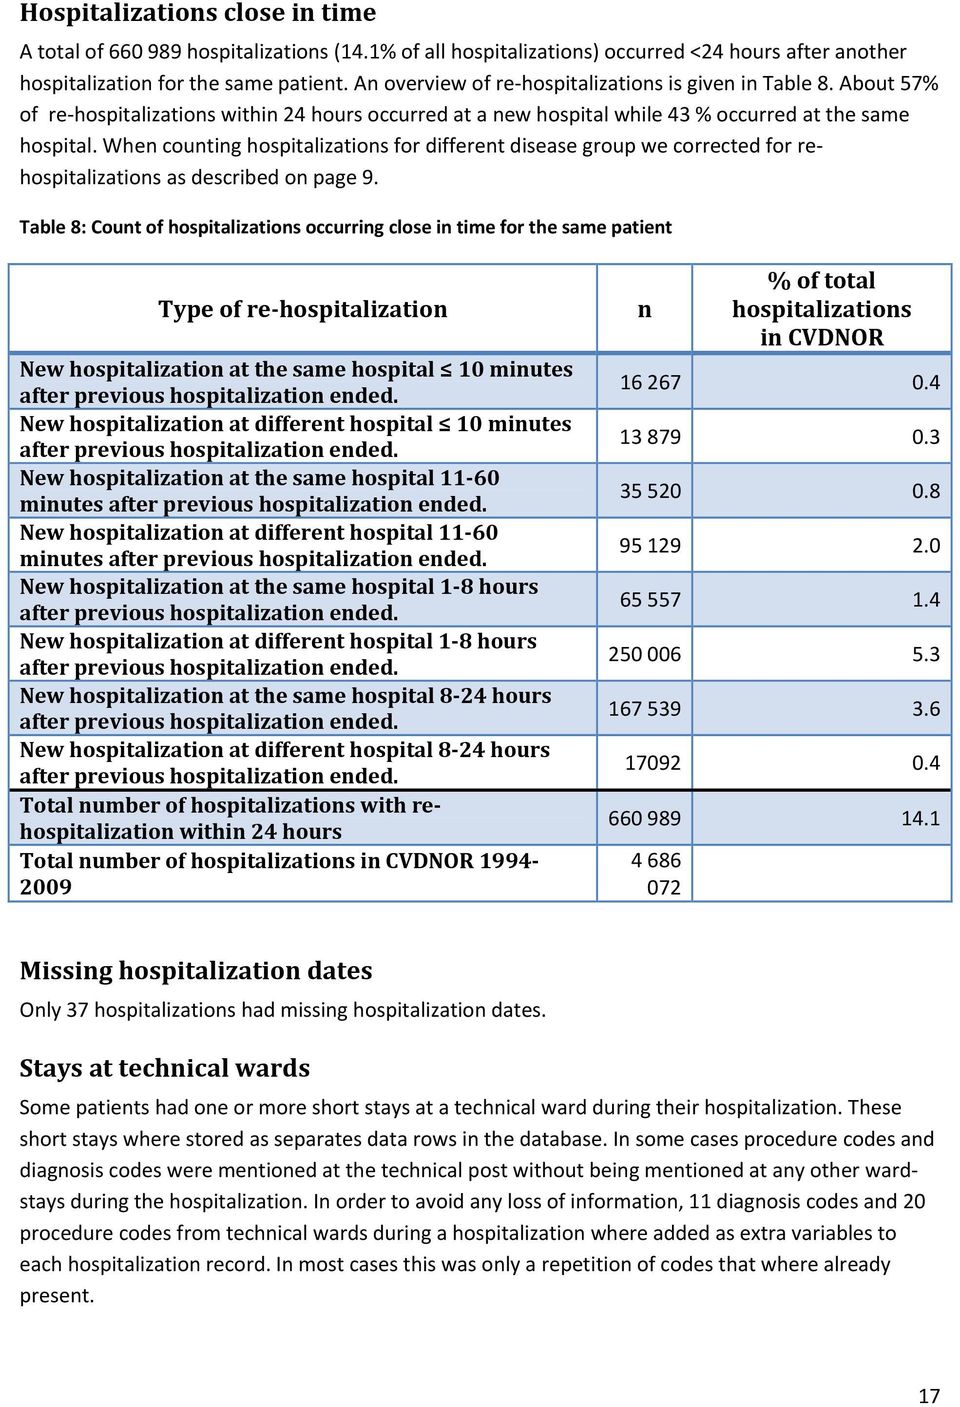 When counting hospitalizations for different disease group we corrected for rehospitalizations as described on page 9.